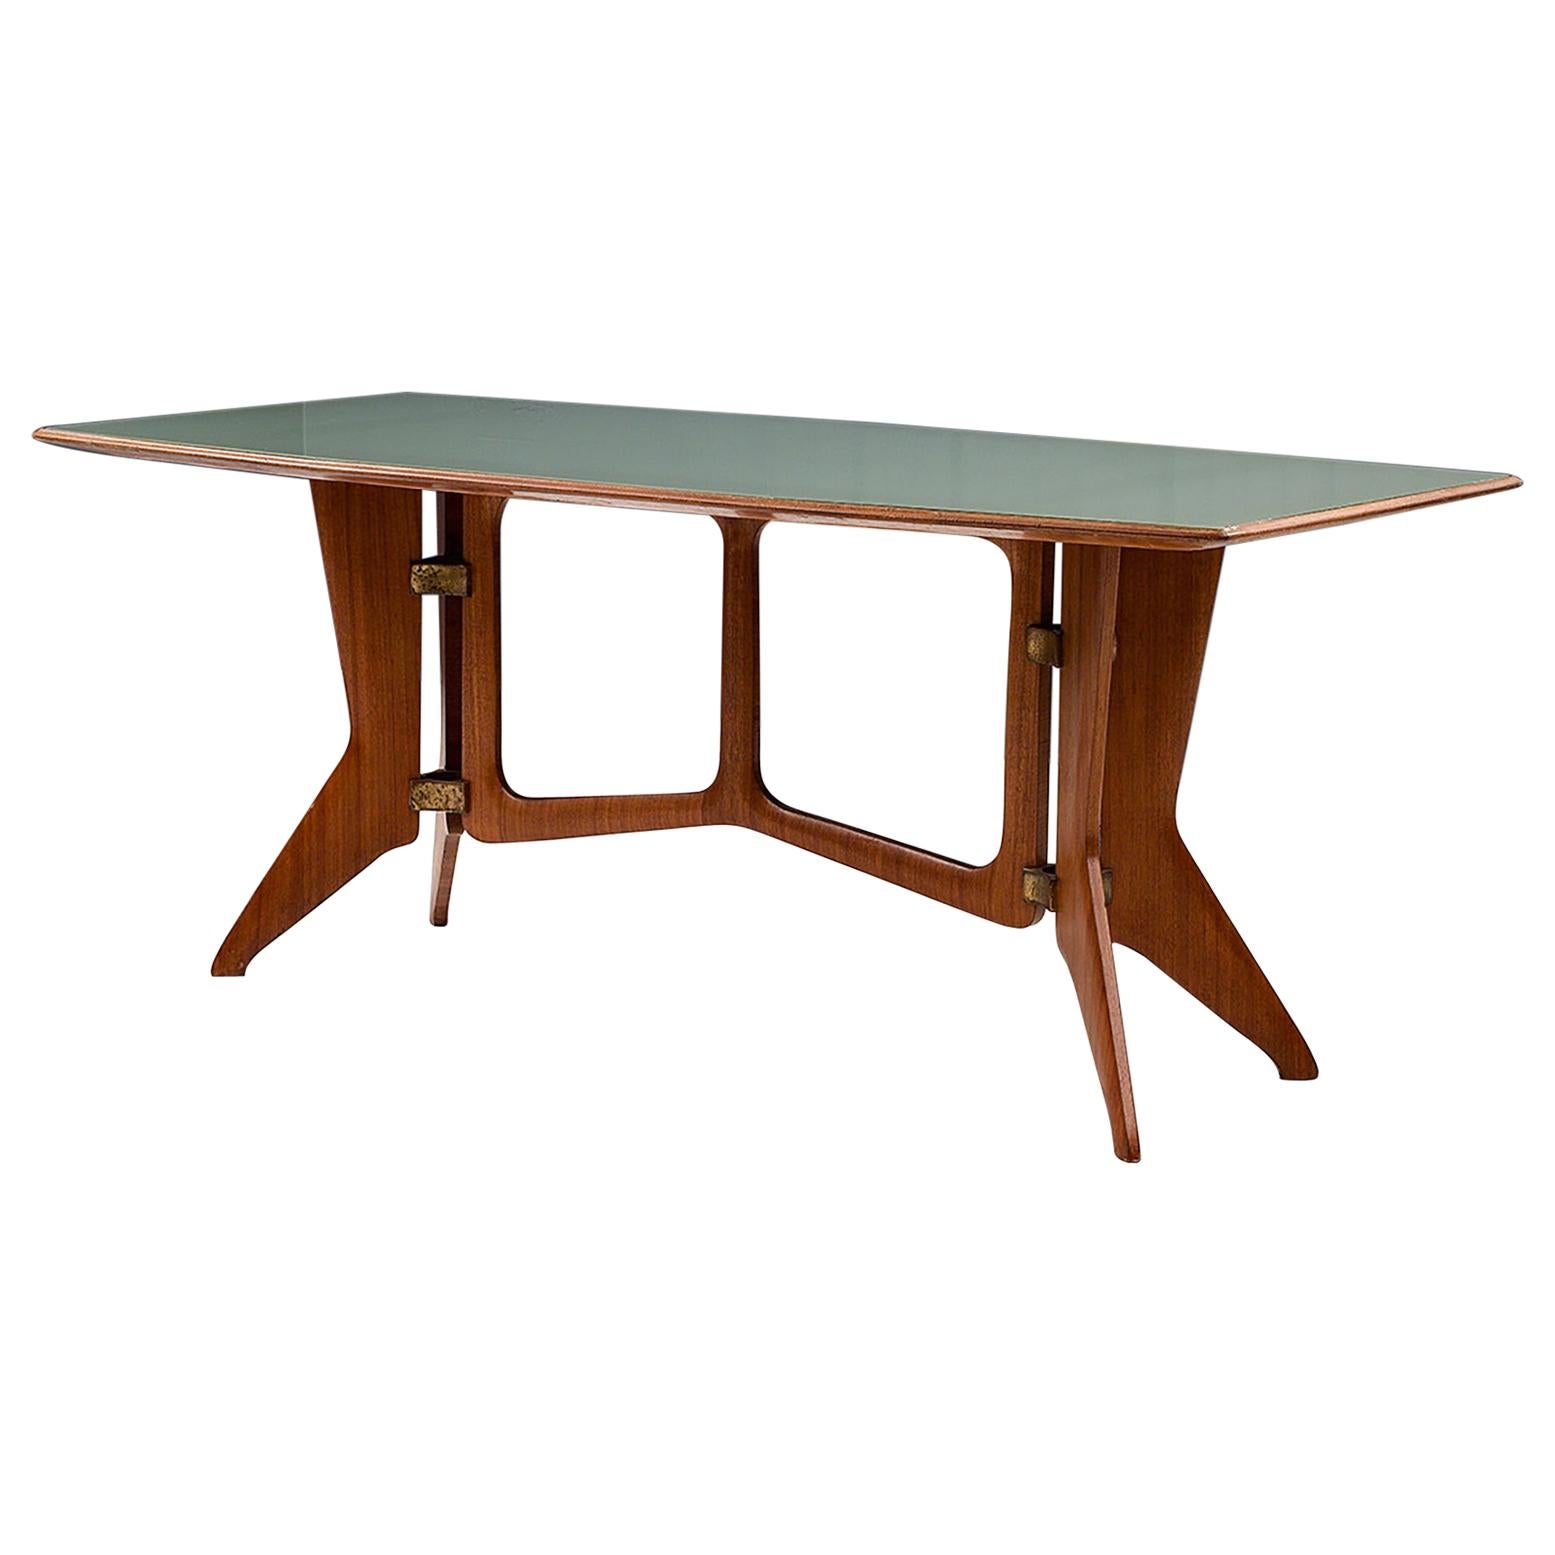 Sculptural  Dining Table by Ariberto Colombo in Teak, Brass and Glass, 1950's